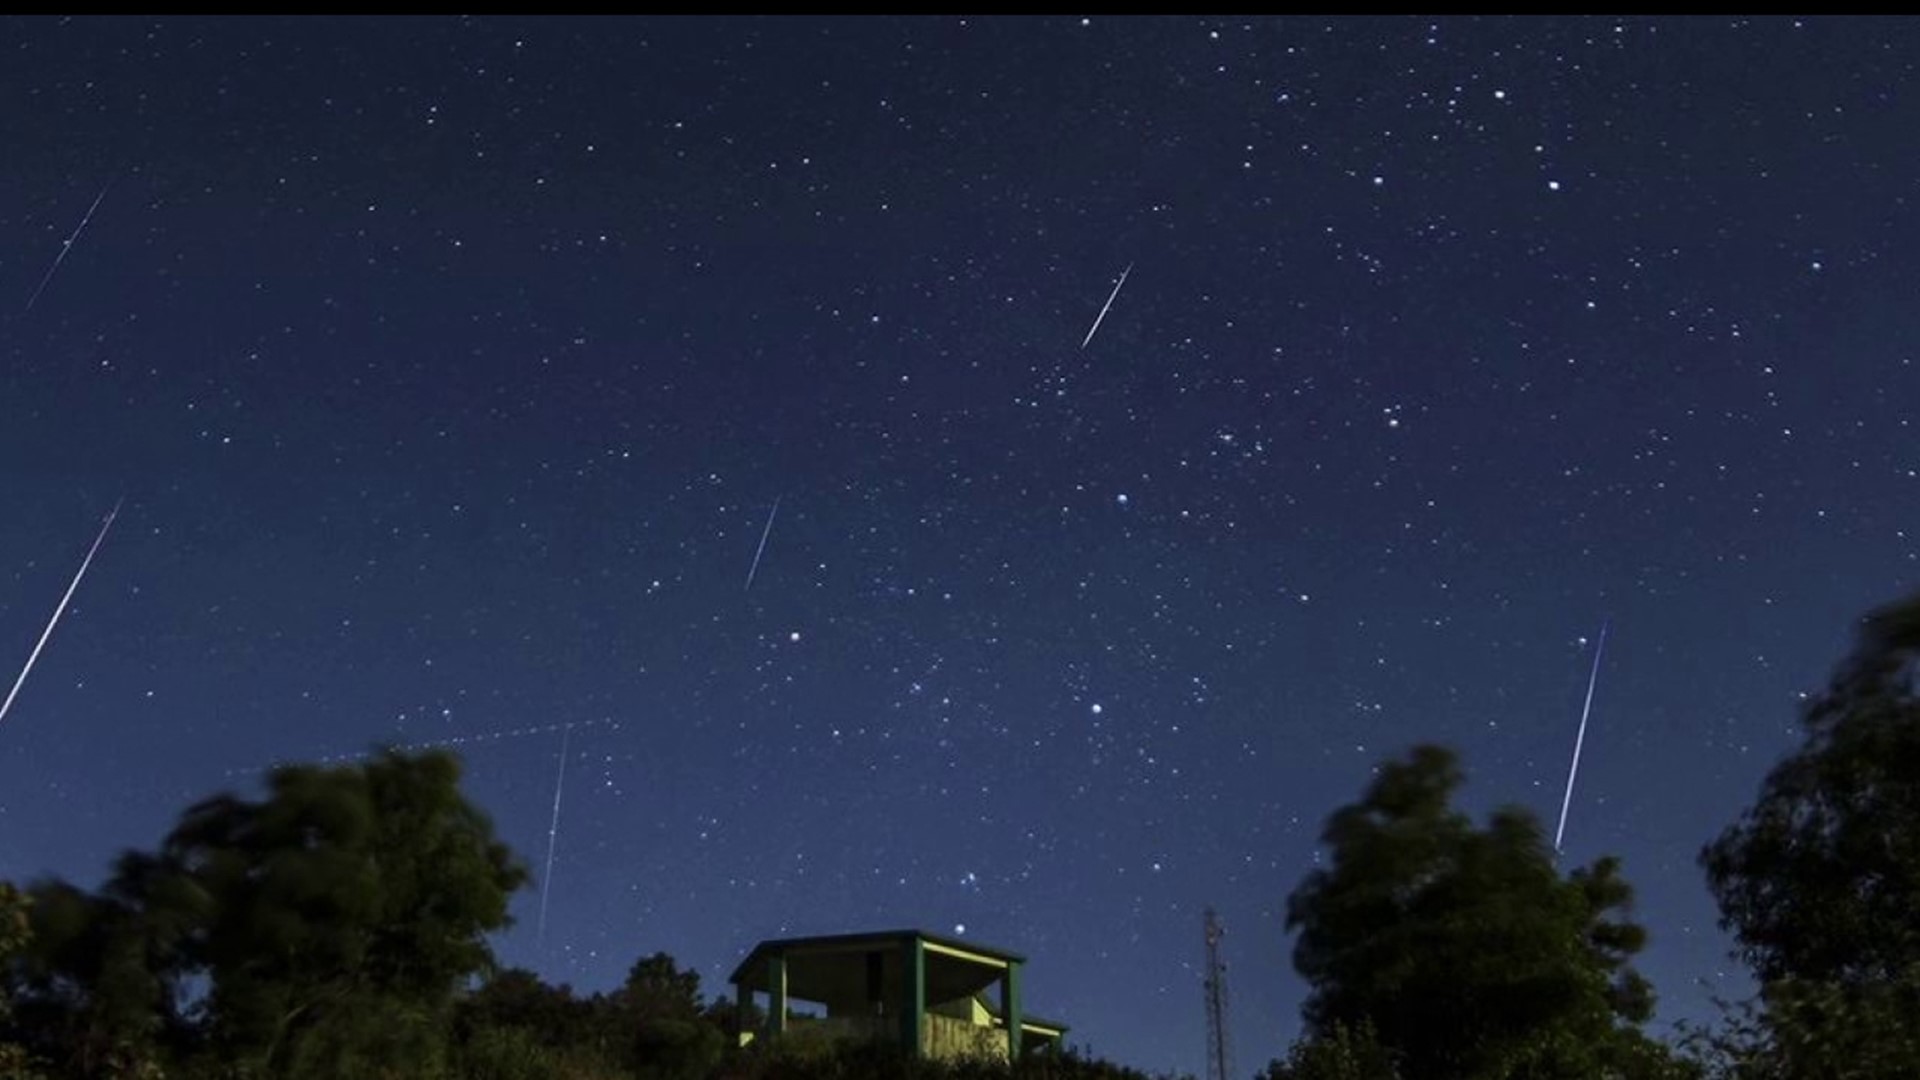 There's a meteor shower that will have Skywatchers looking up later this week. As Newswatch 16's John Hickey explains, this one has an interesting history.